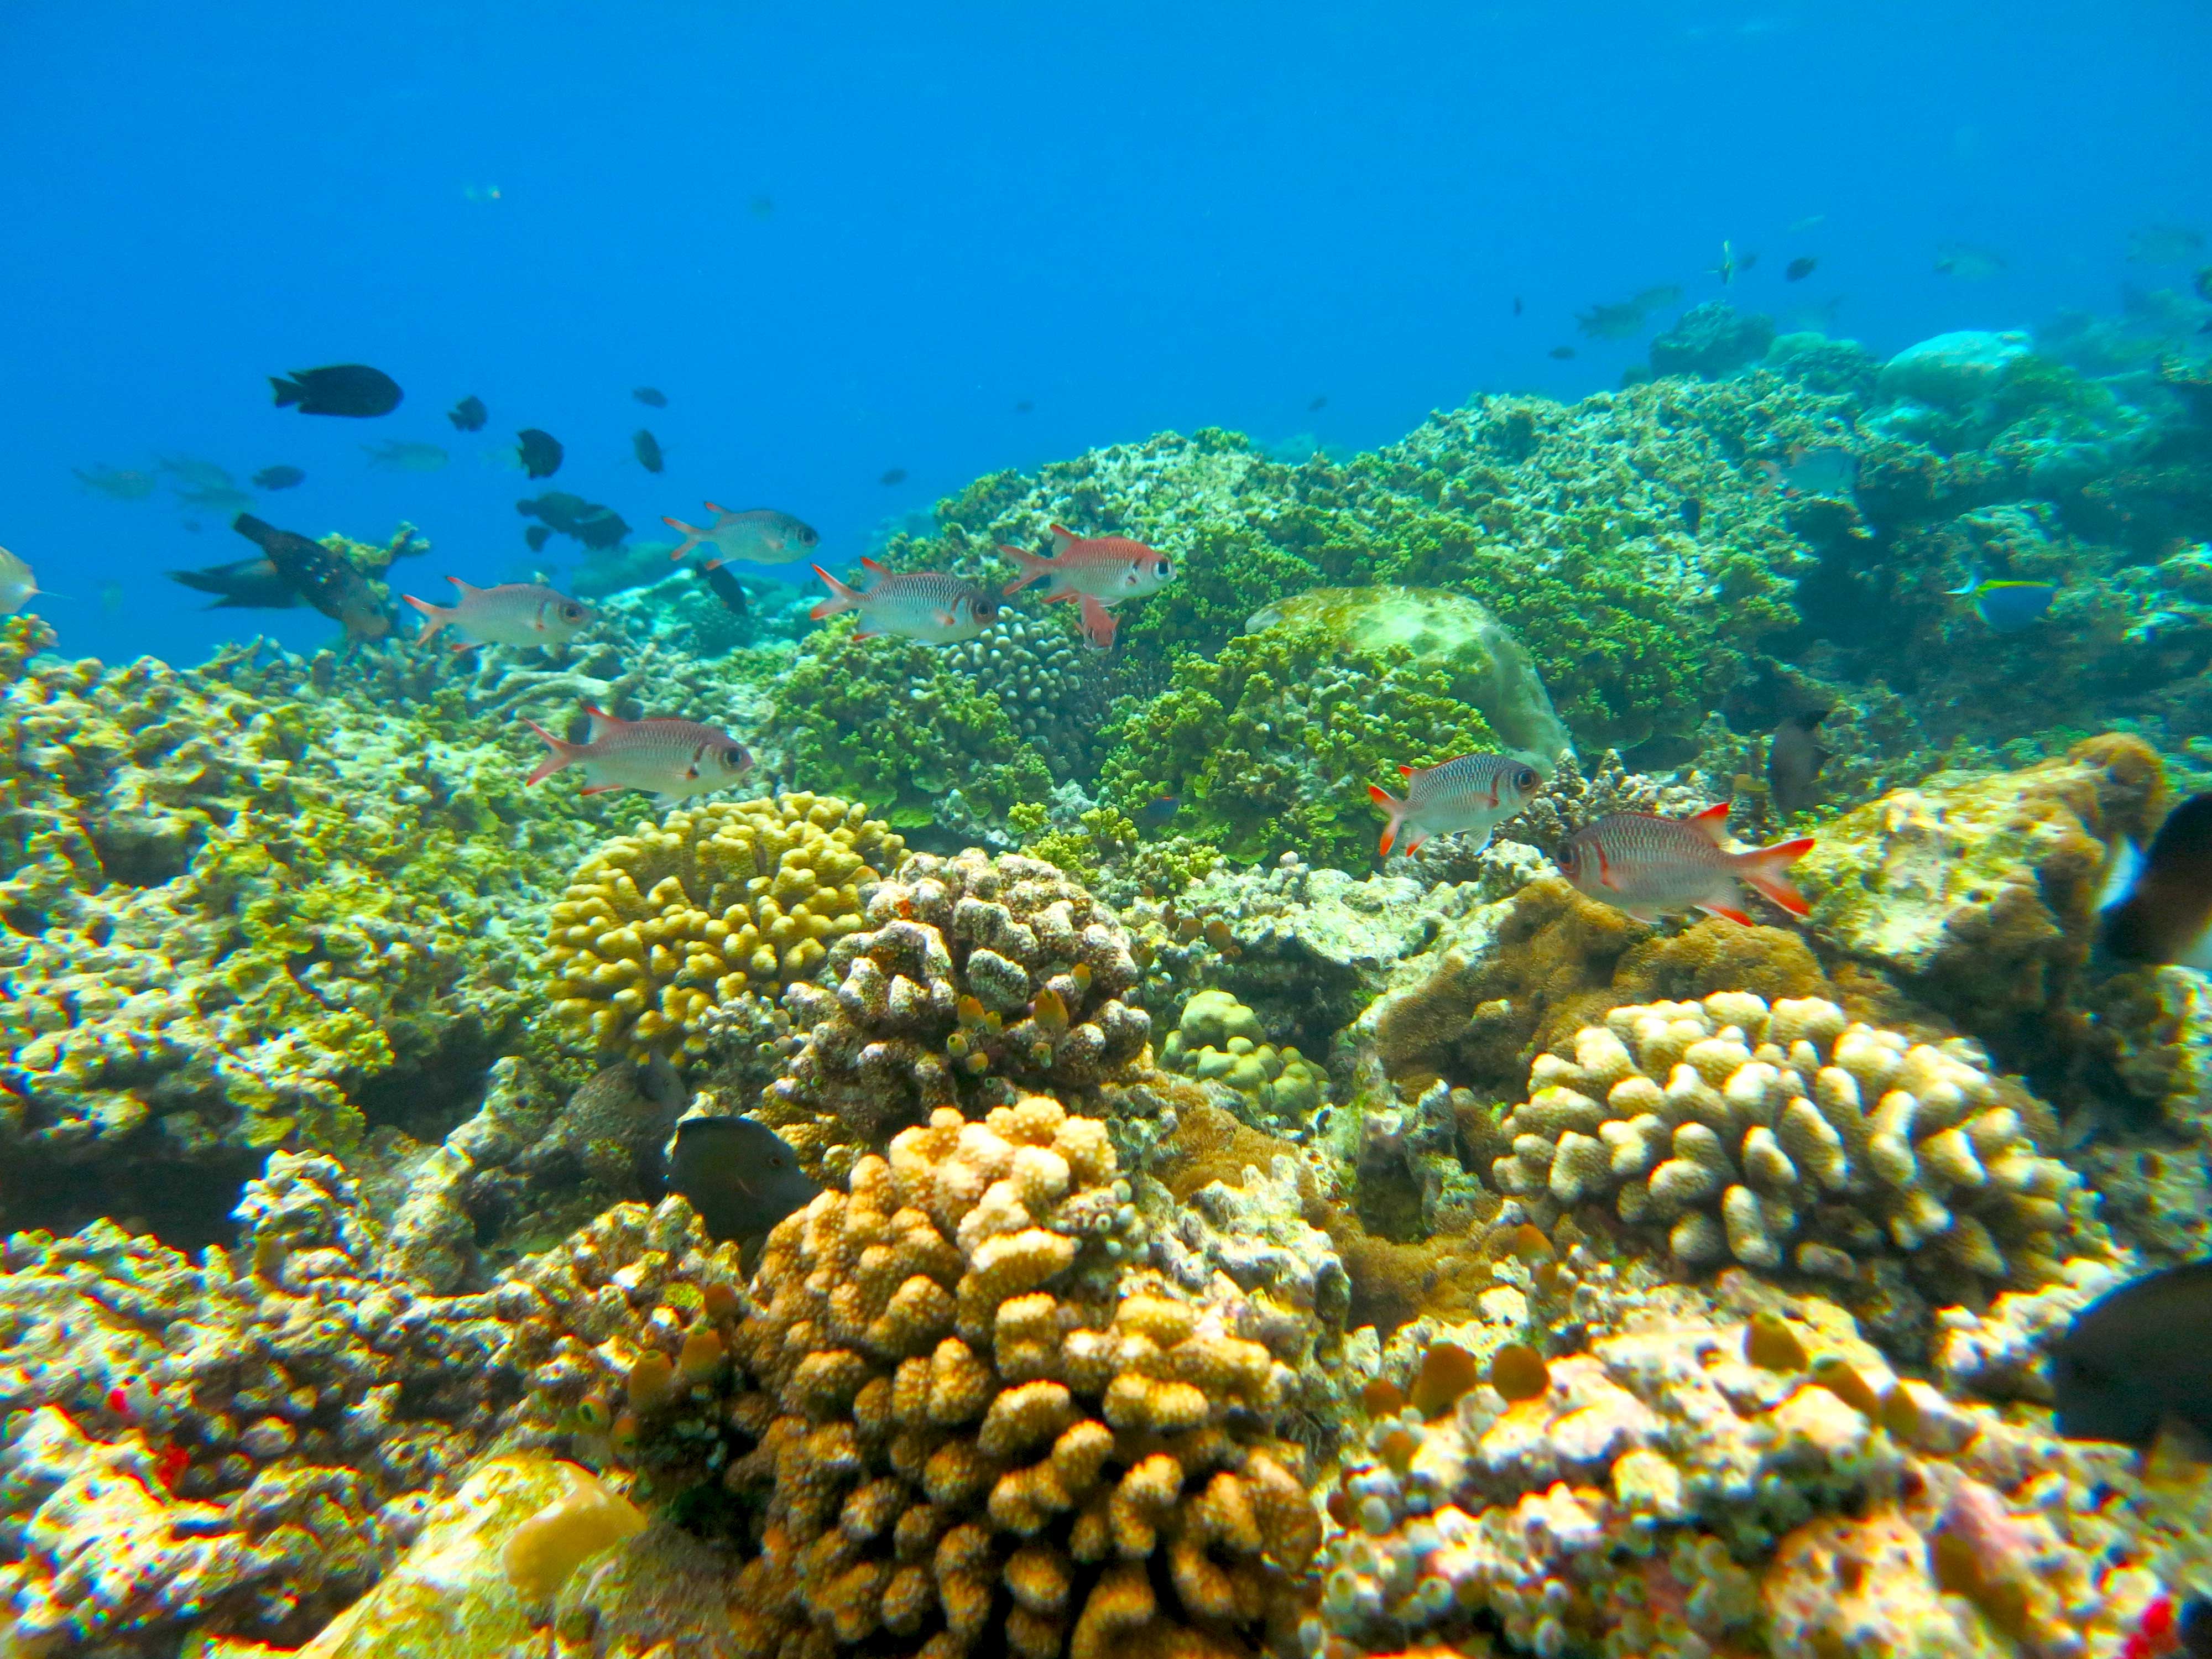 Lovely coral reefs in the world